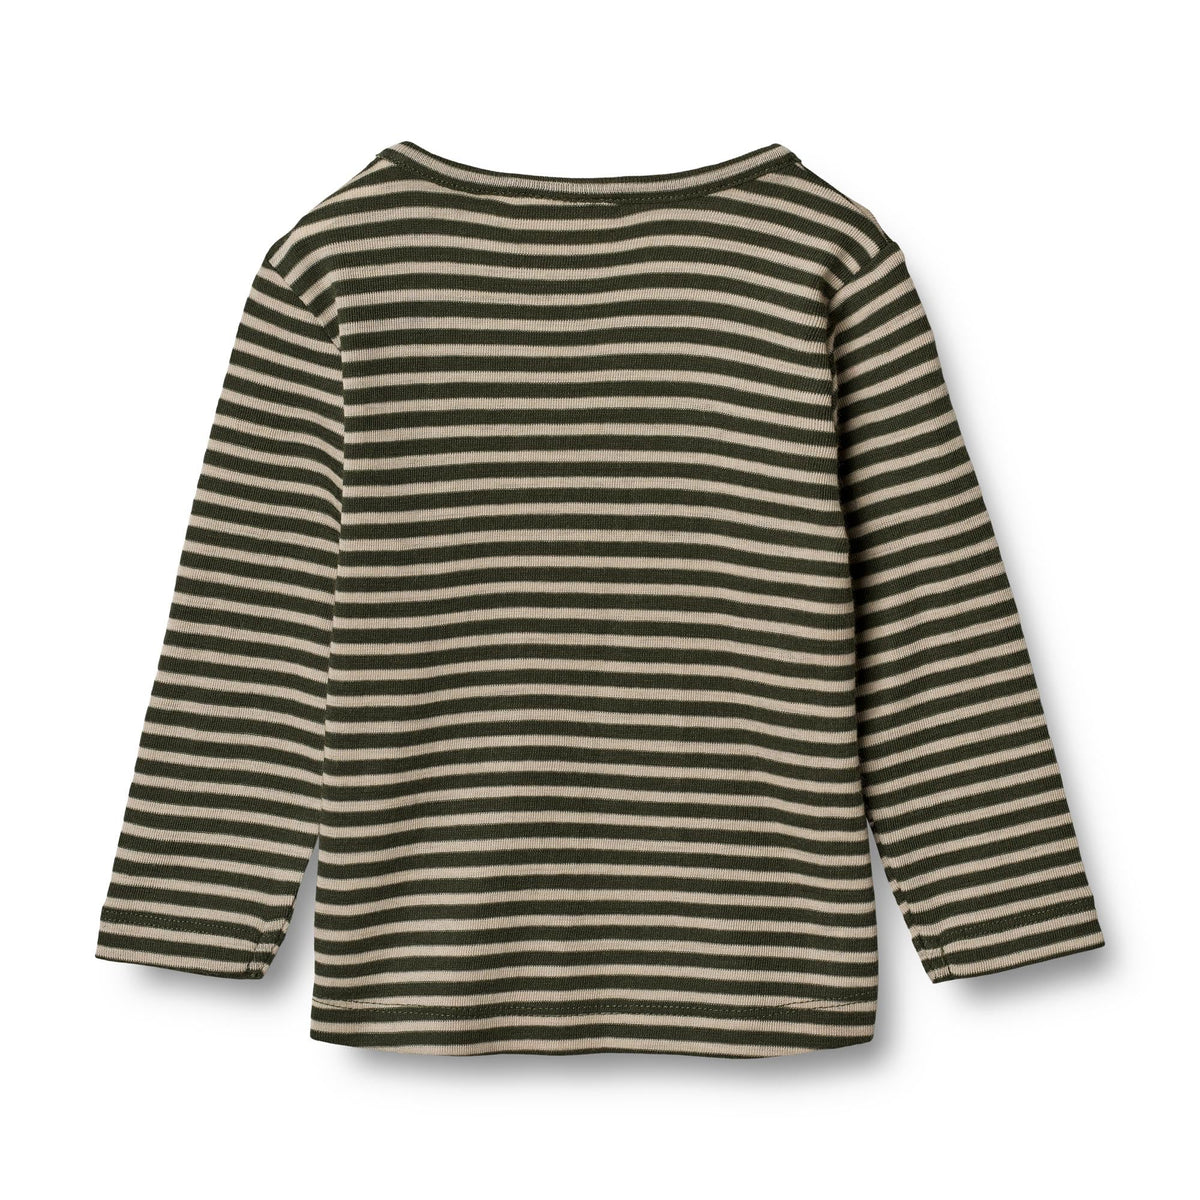 We have an incredible T-Shirt of LS Wool Wool range Wheat